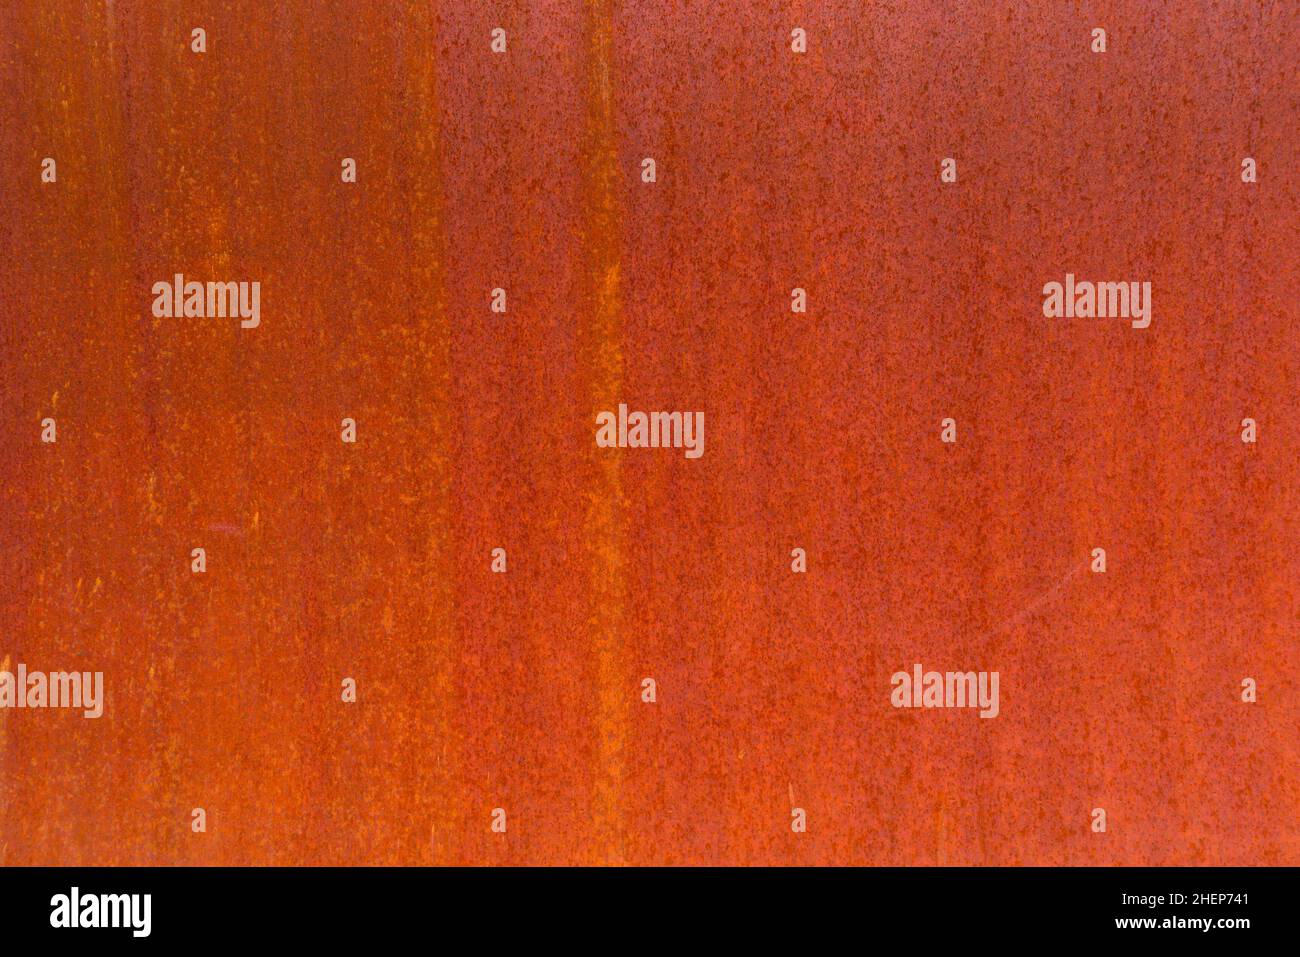 red old rustic steel plate for background,ready for product display montage. Stock Photo